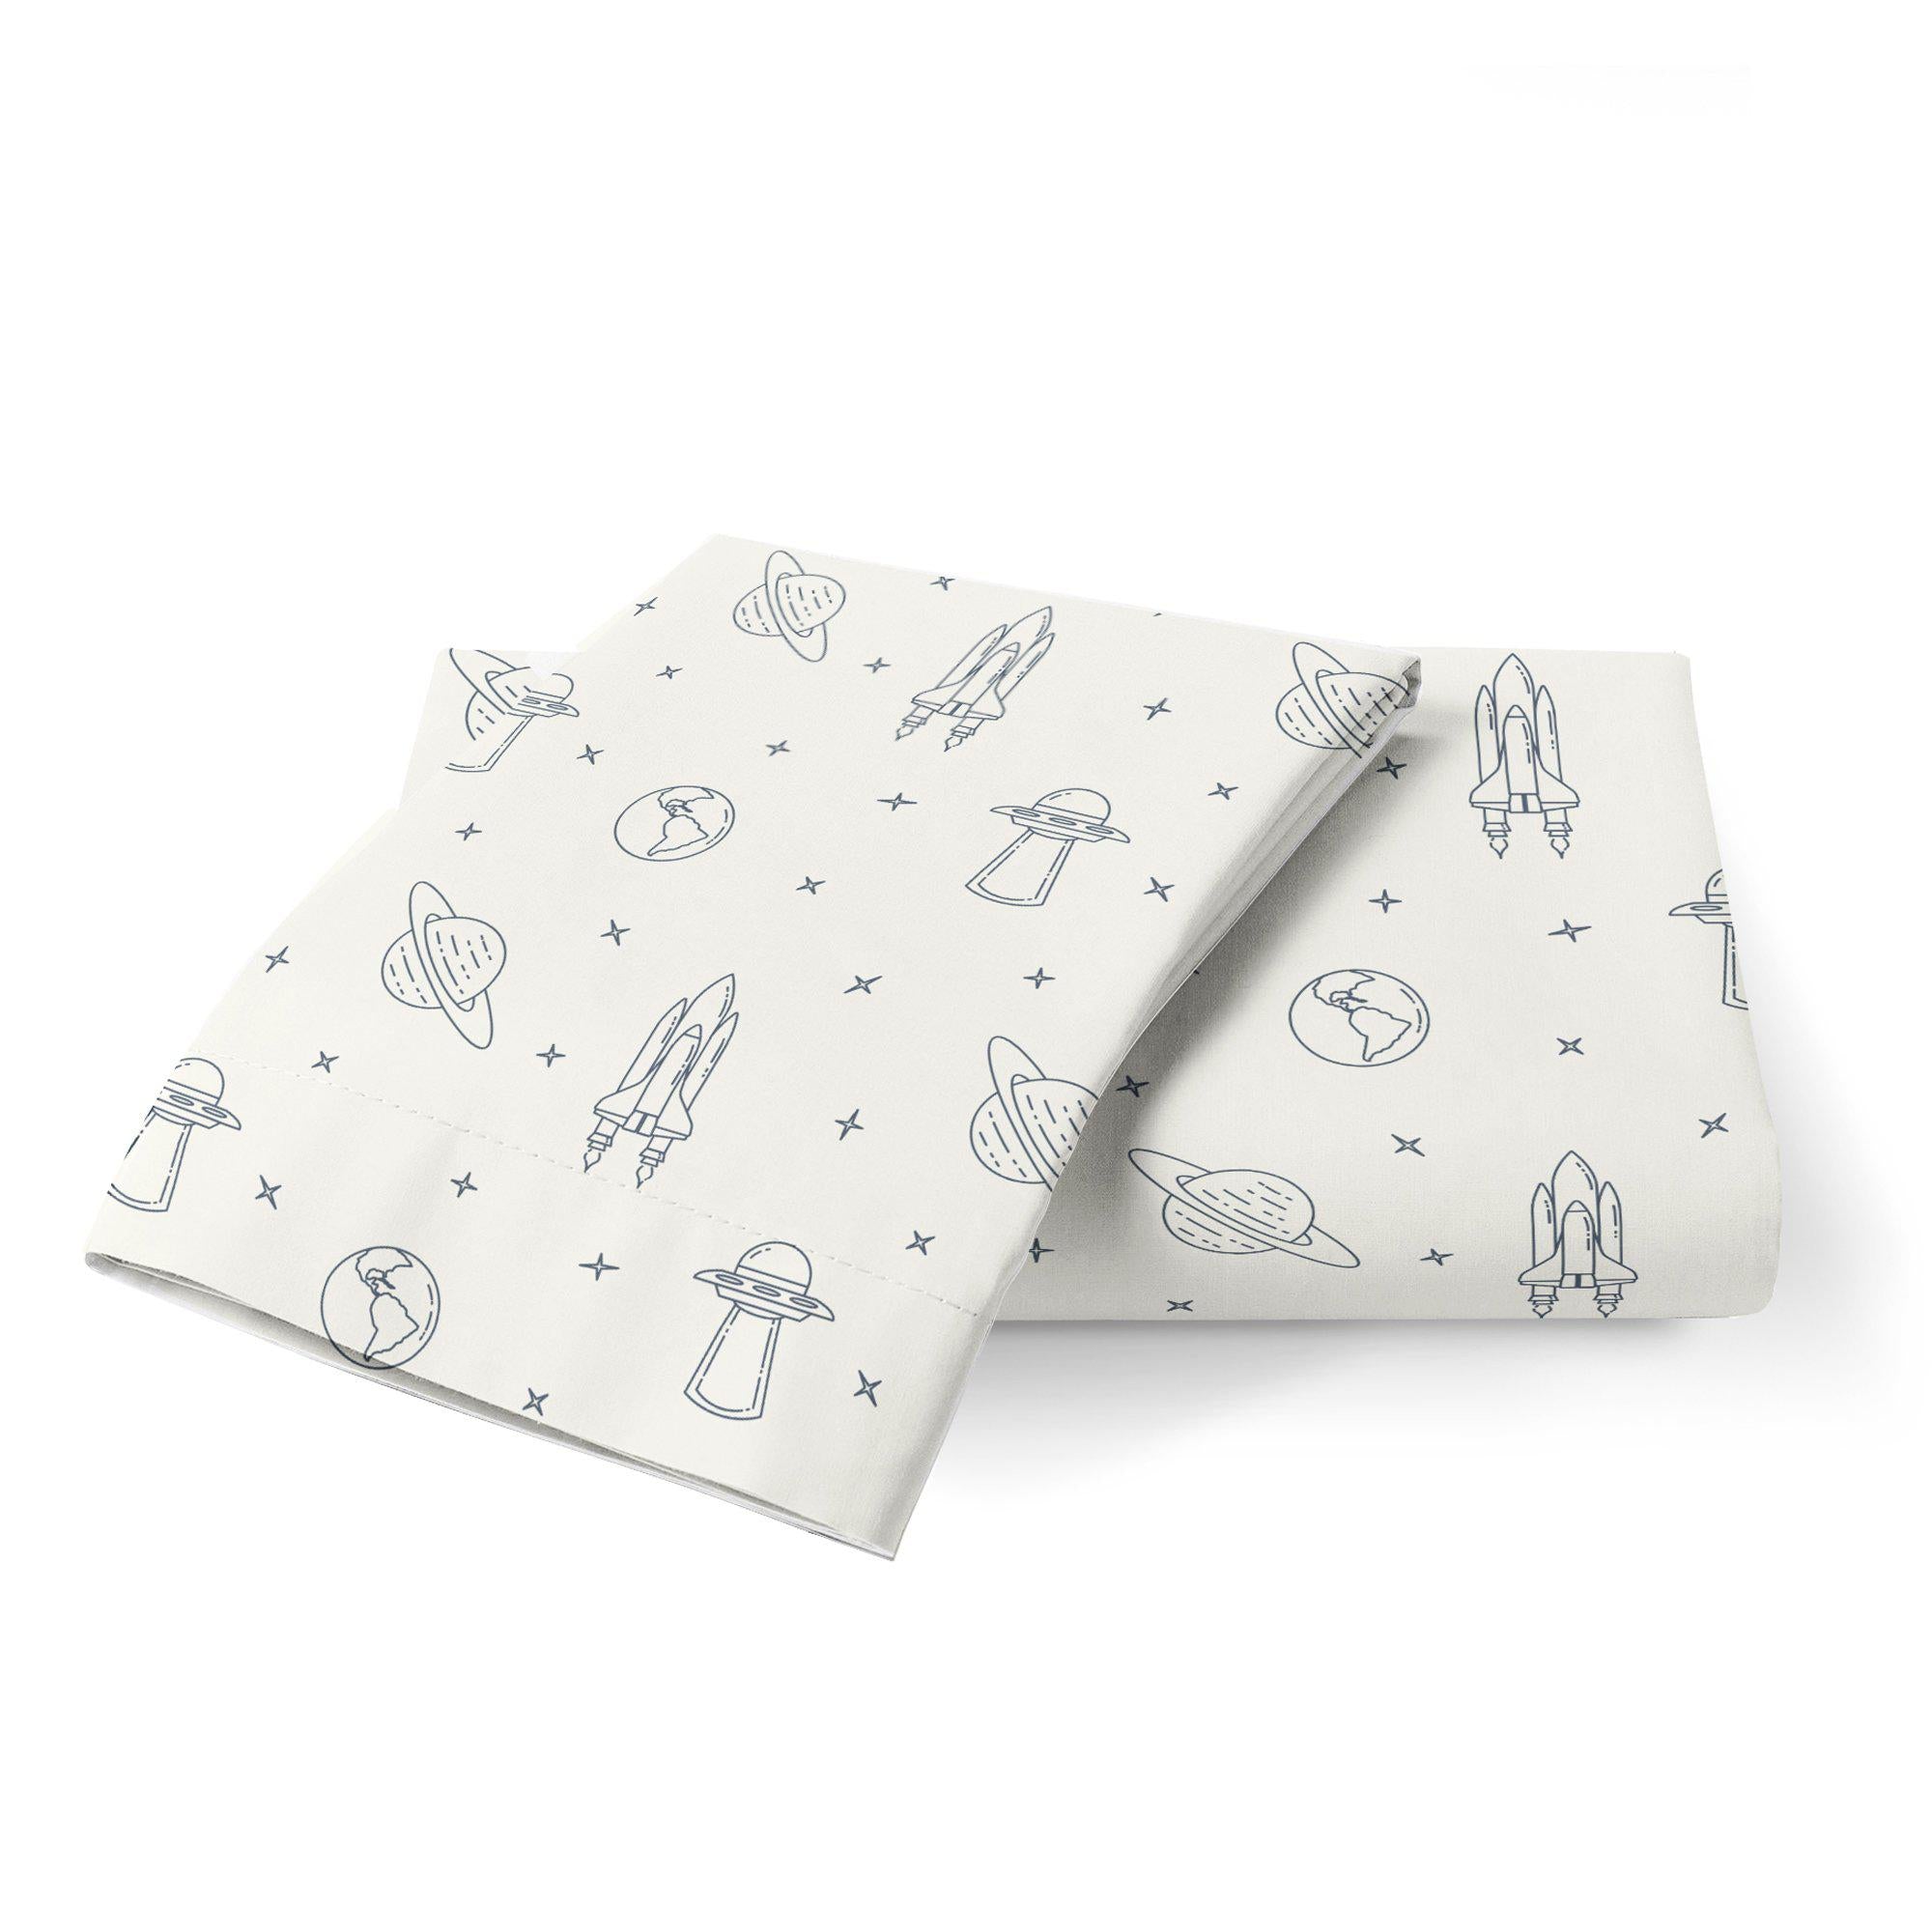 Two folded white towels with a blue space-themed pattern including rockets, planets, and stars, displayed on a plain white background of the Organic Cotton Toddler Pillowcase - Celestial by Makemake Organics.